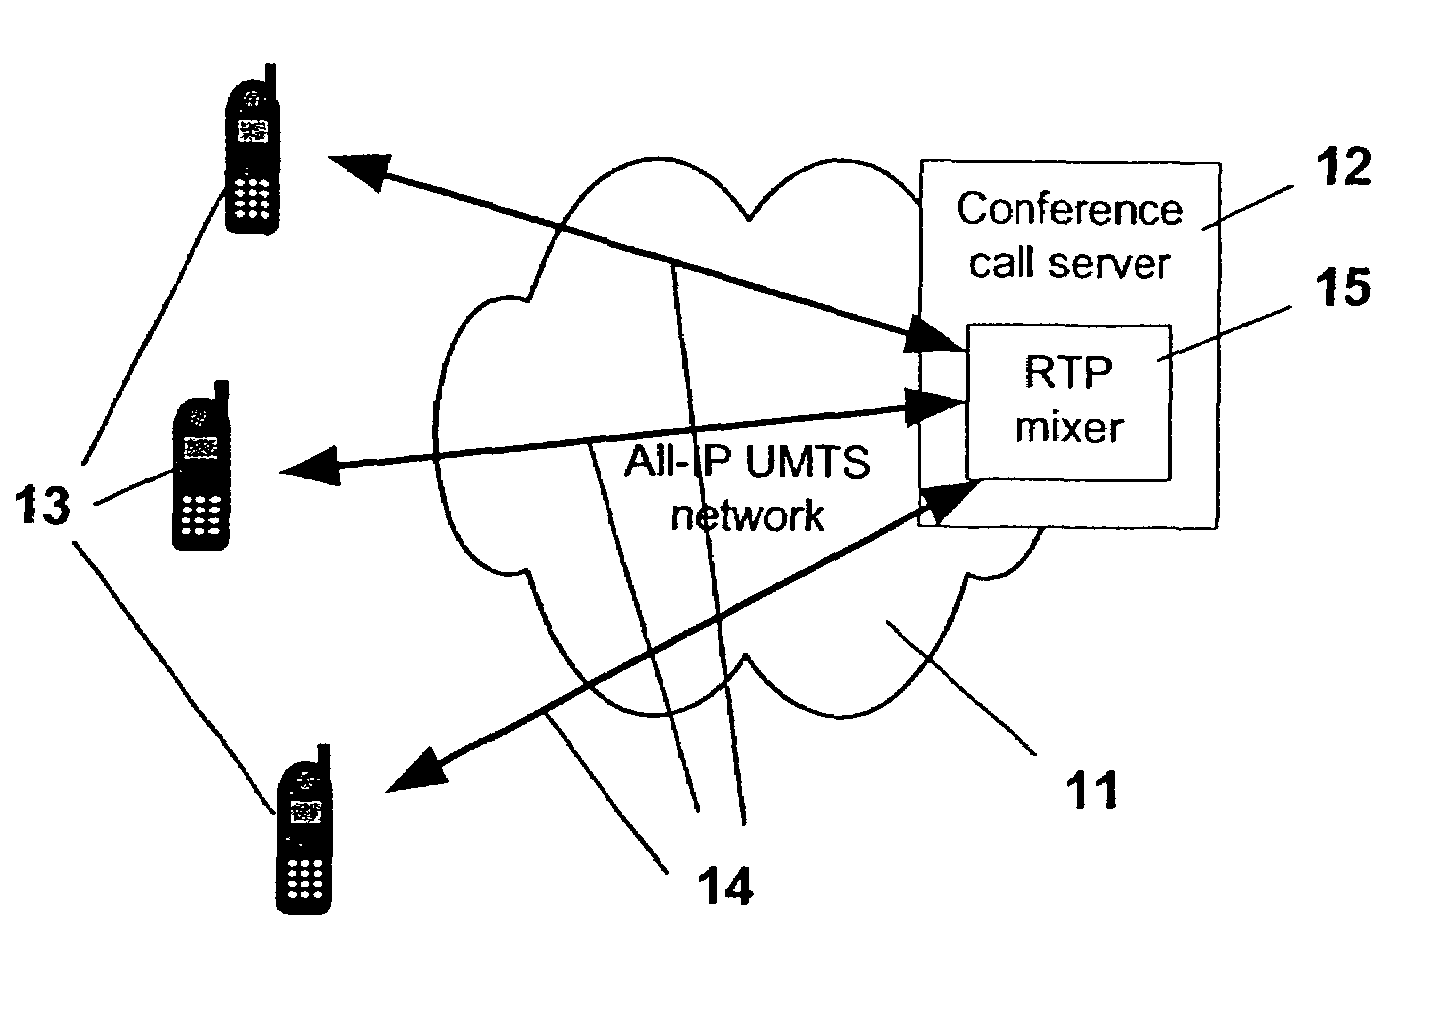 Managing a packet switched conference call